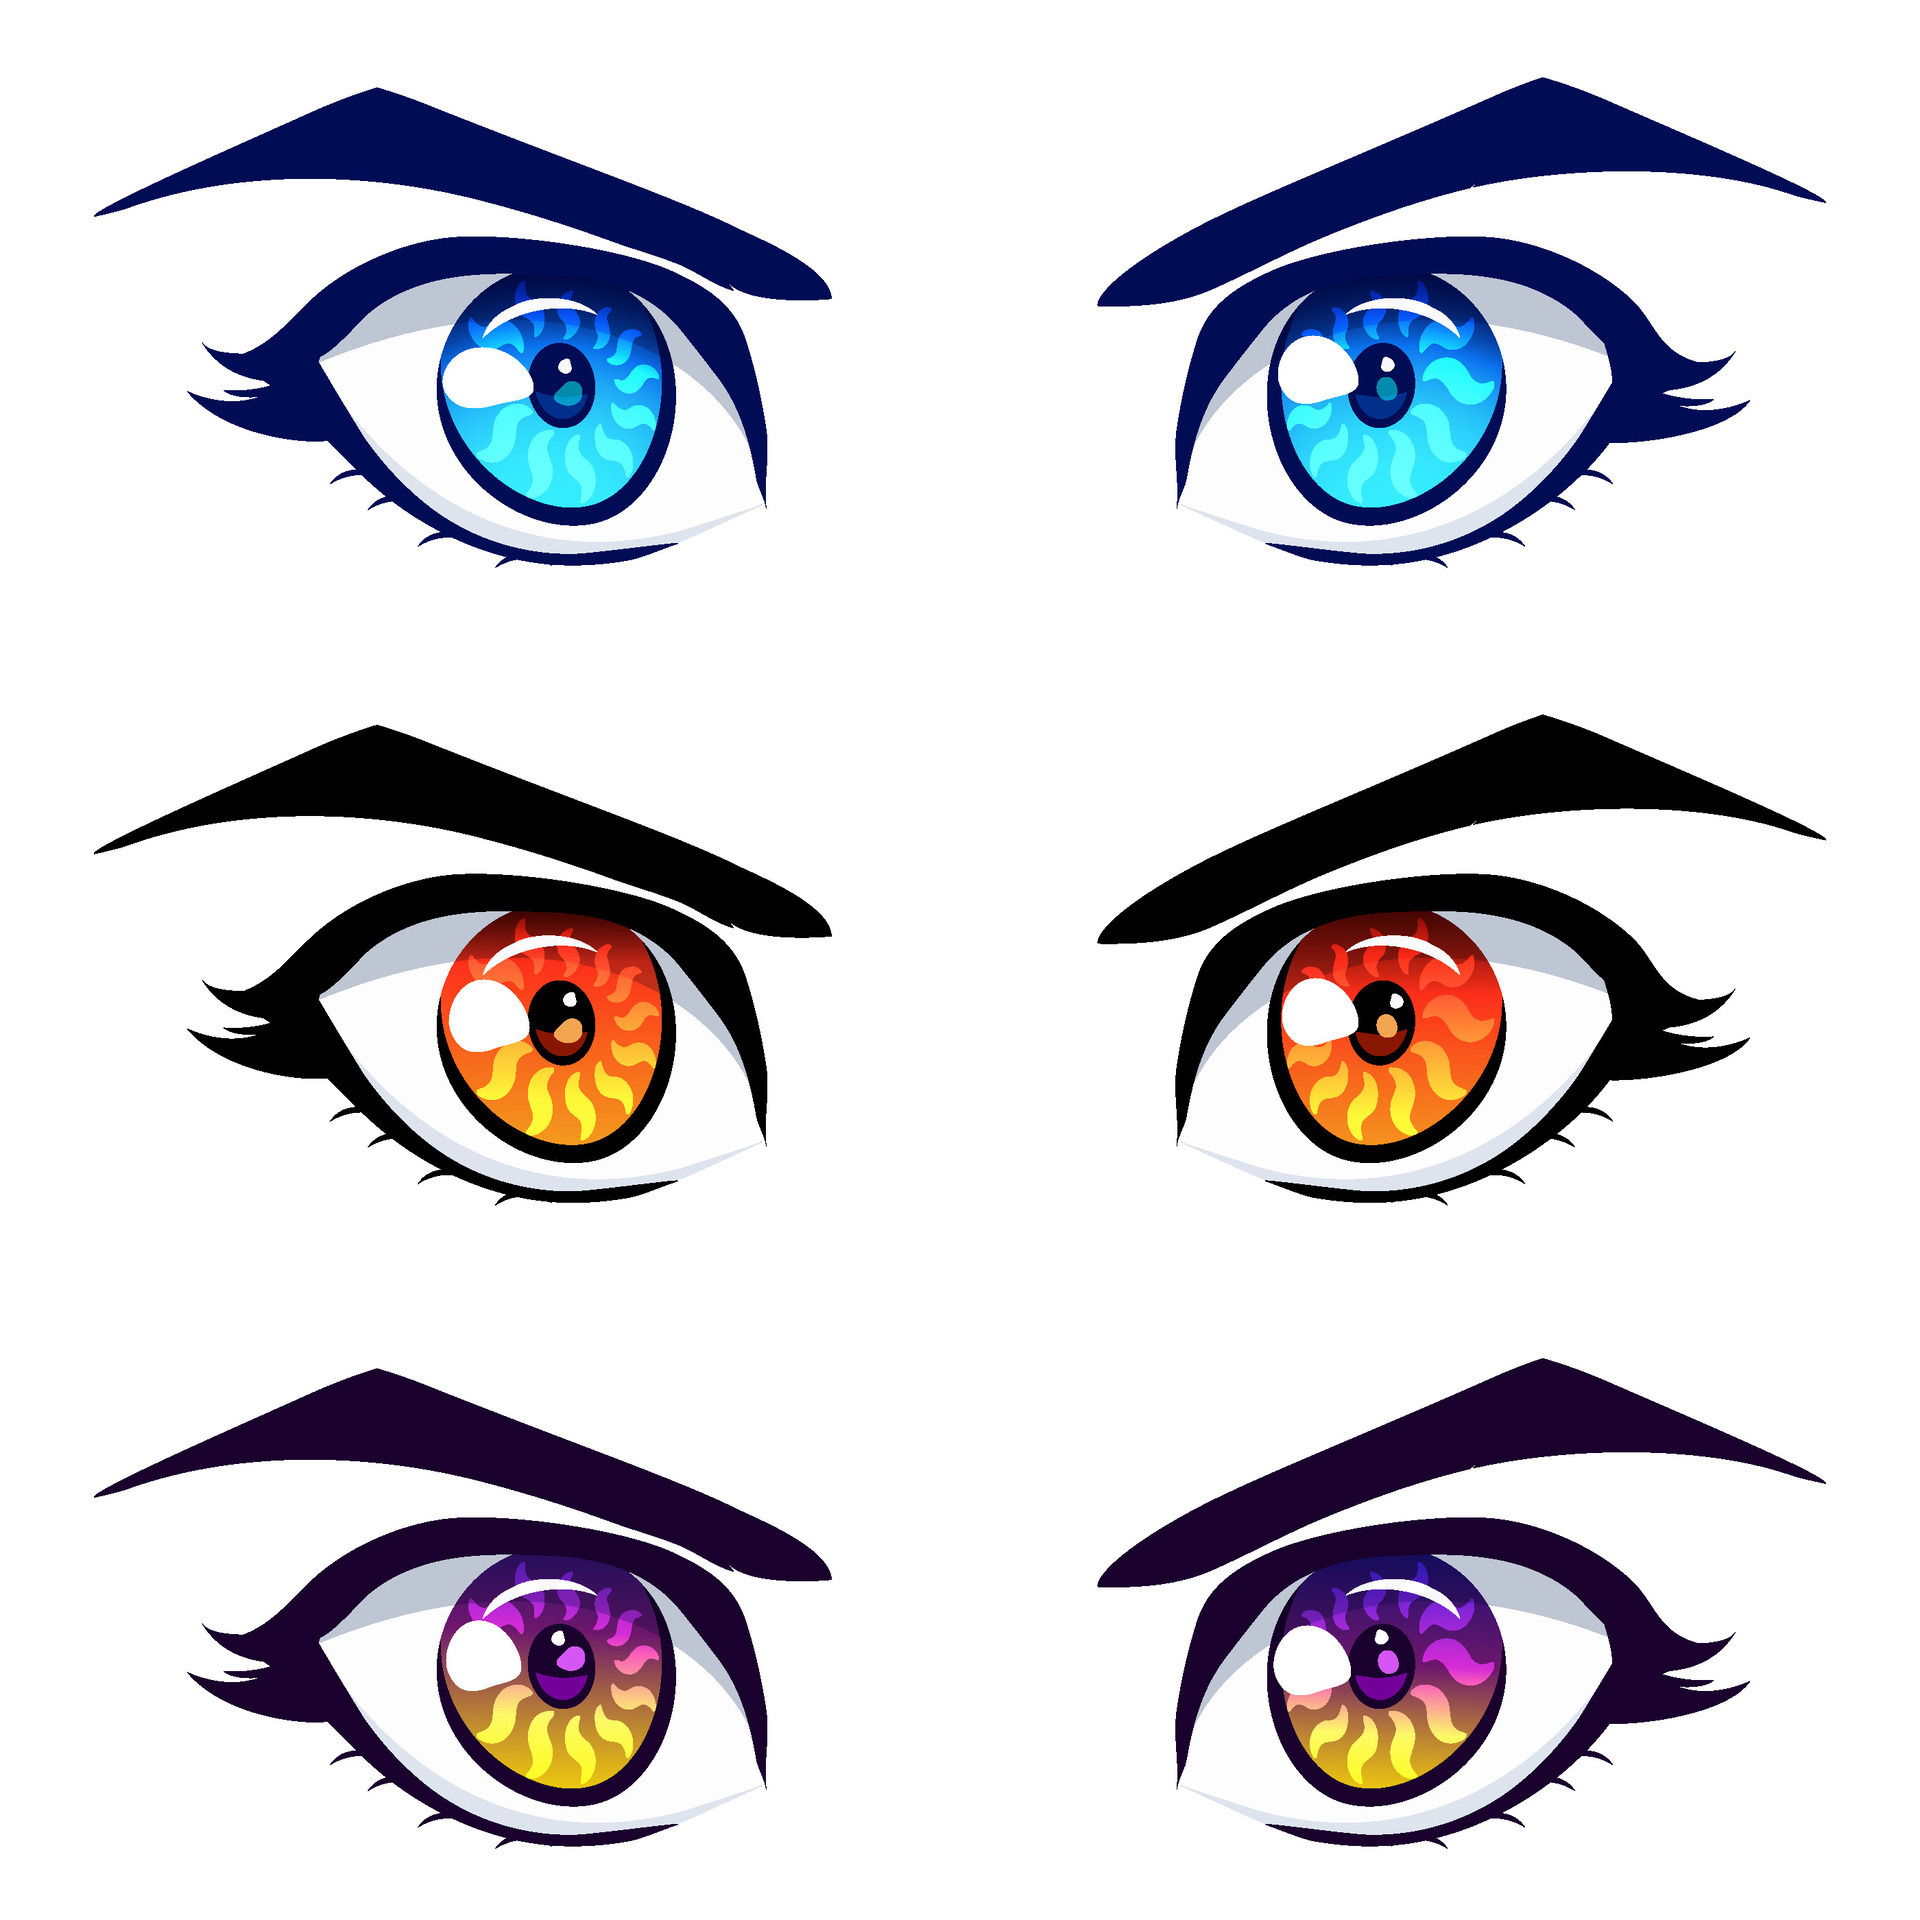 Anime Eyebrow Reference: Beyond the Eyes - Art Reference Point